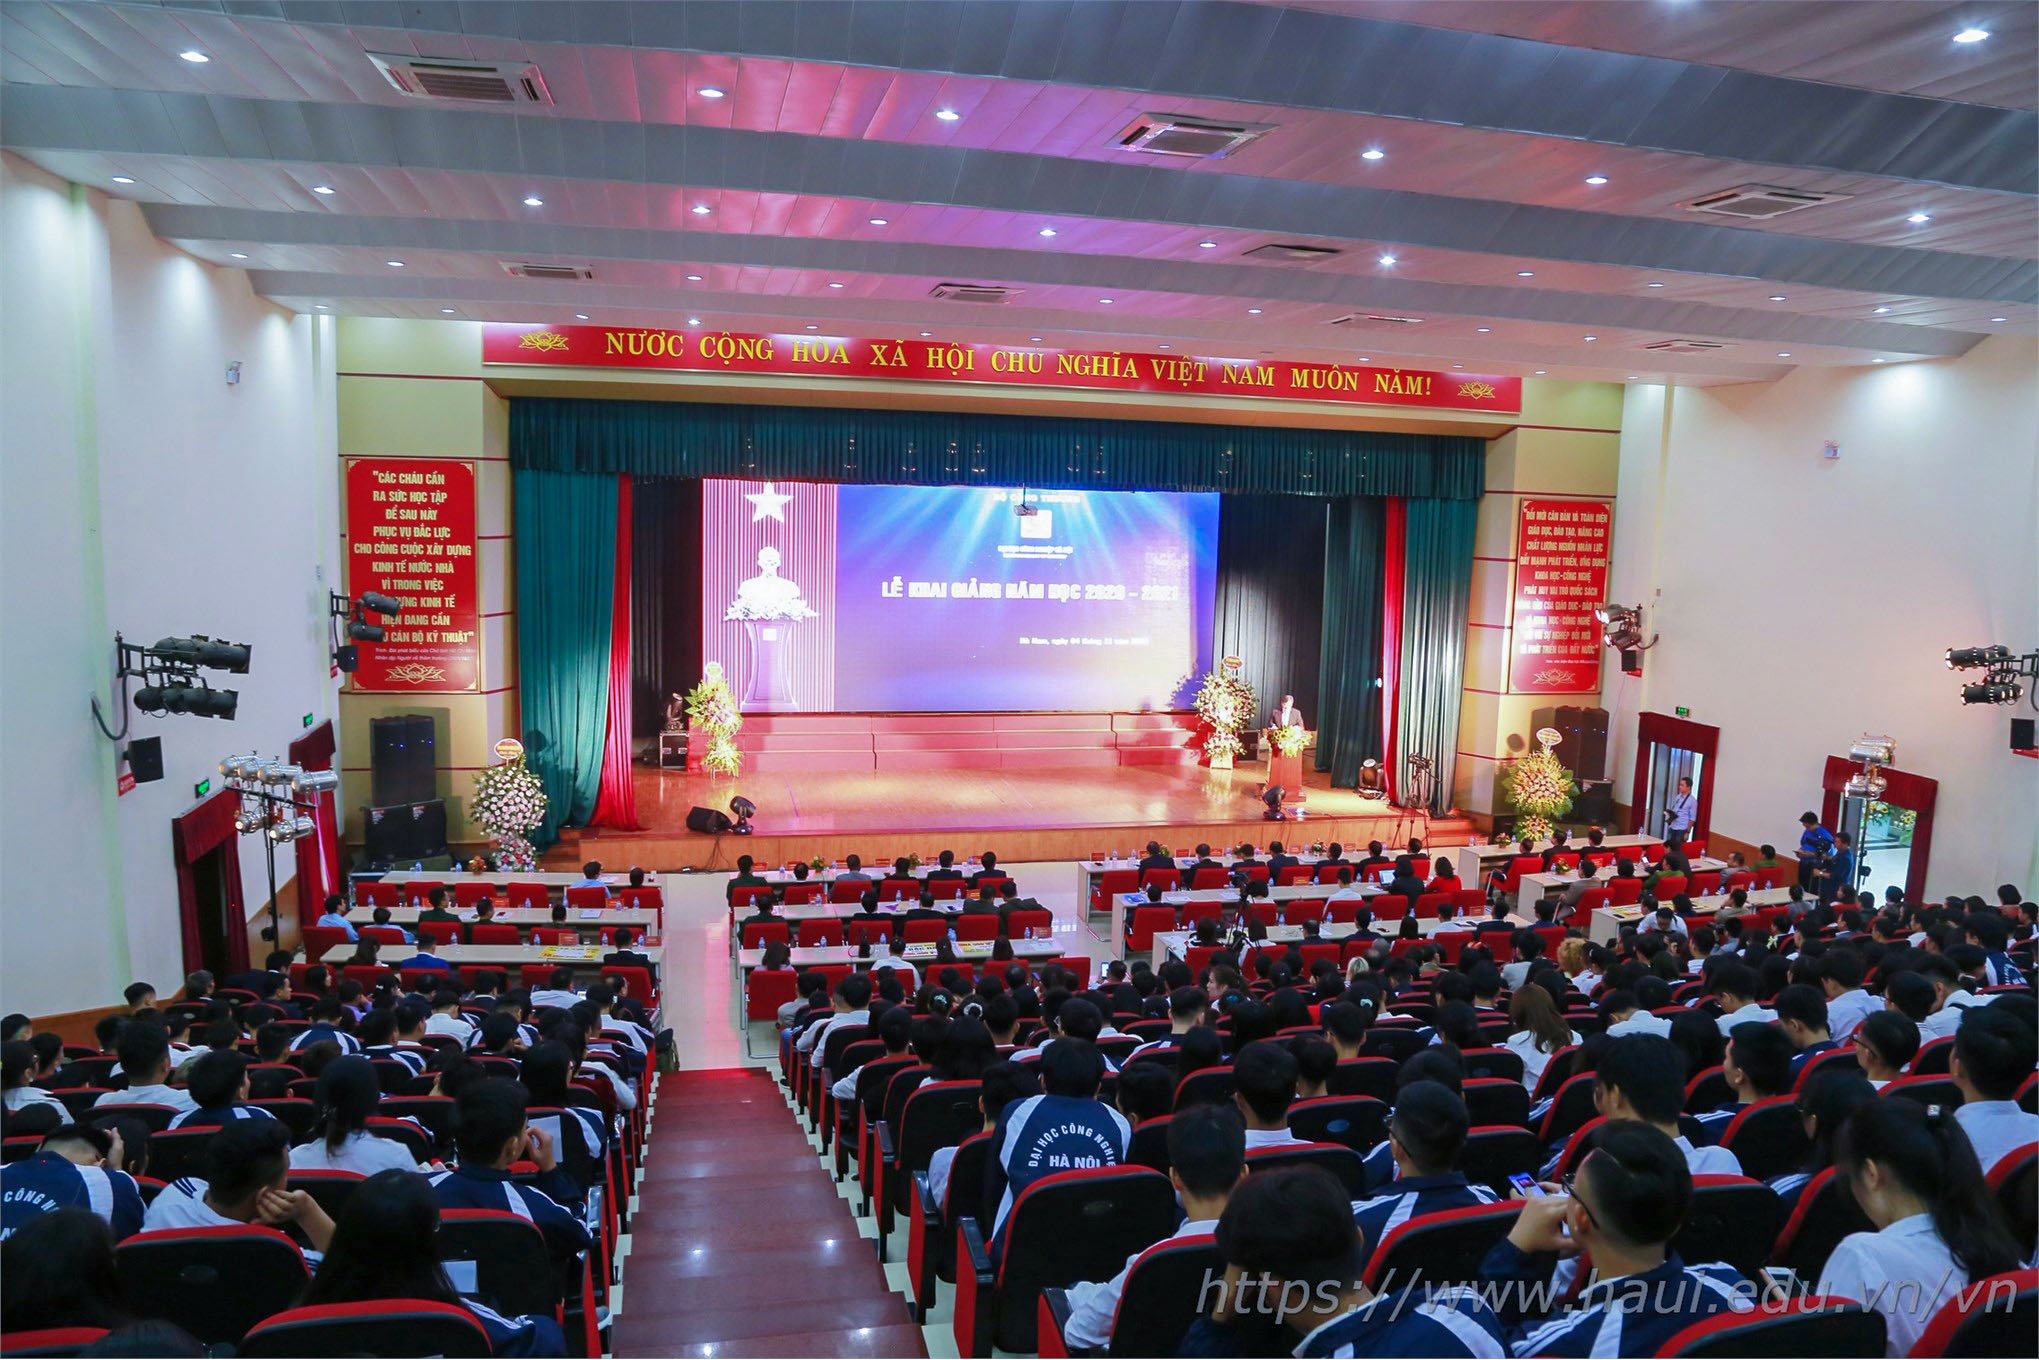 Opening Ceremony of New Academic Year 2020 - 2021